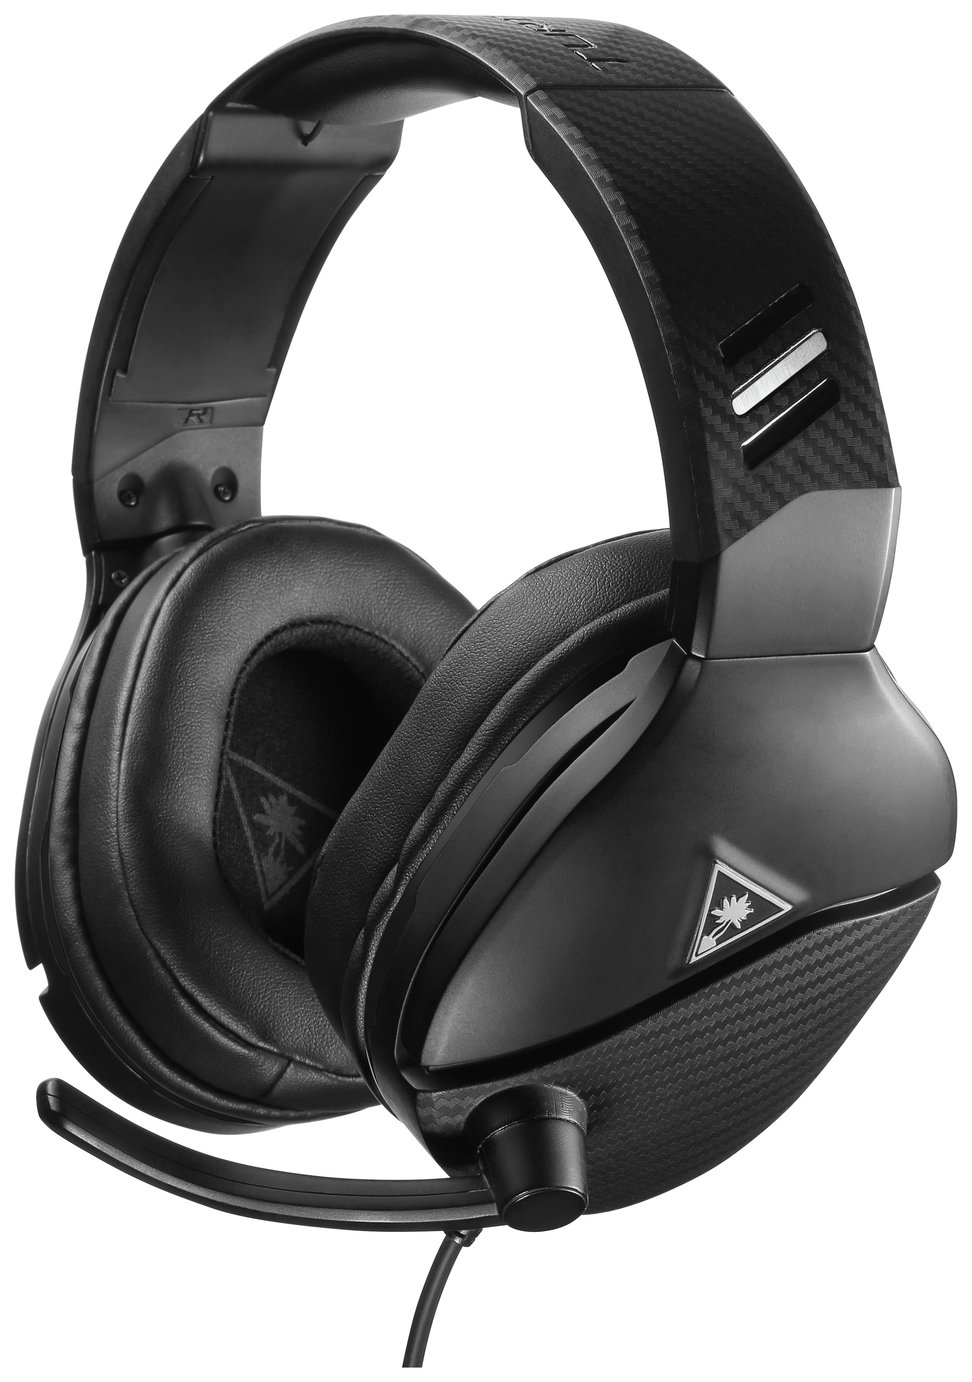 Turtle Beach Atlas One PC, Xbox, PS5, PS4 Headset Review